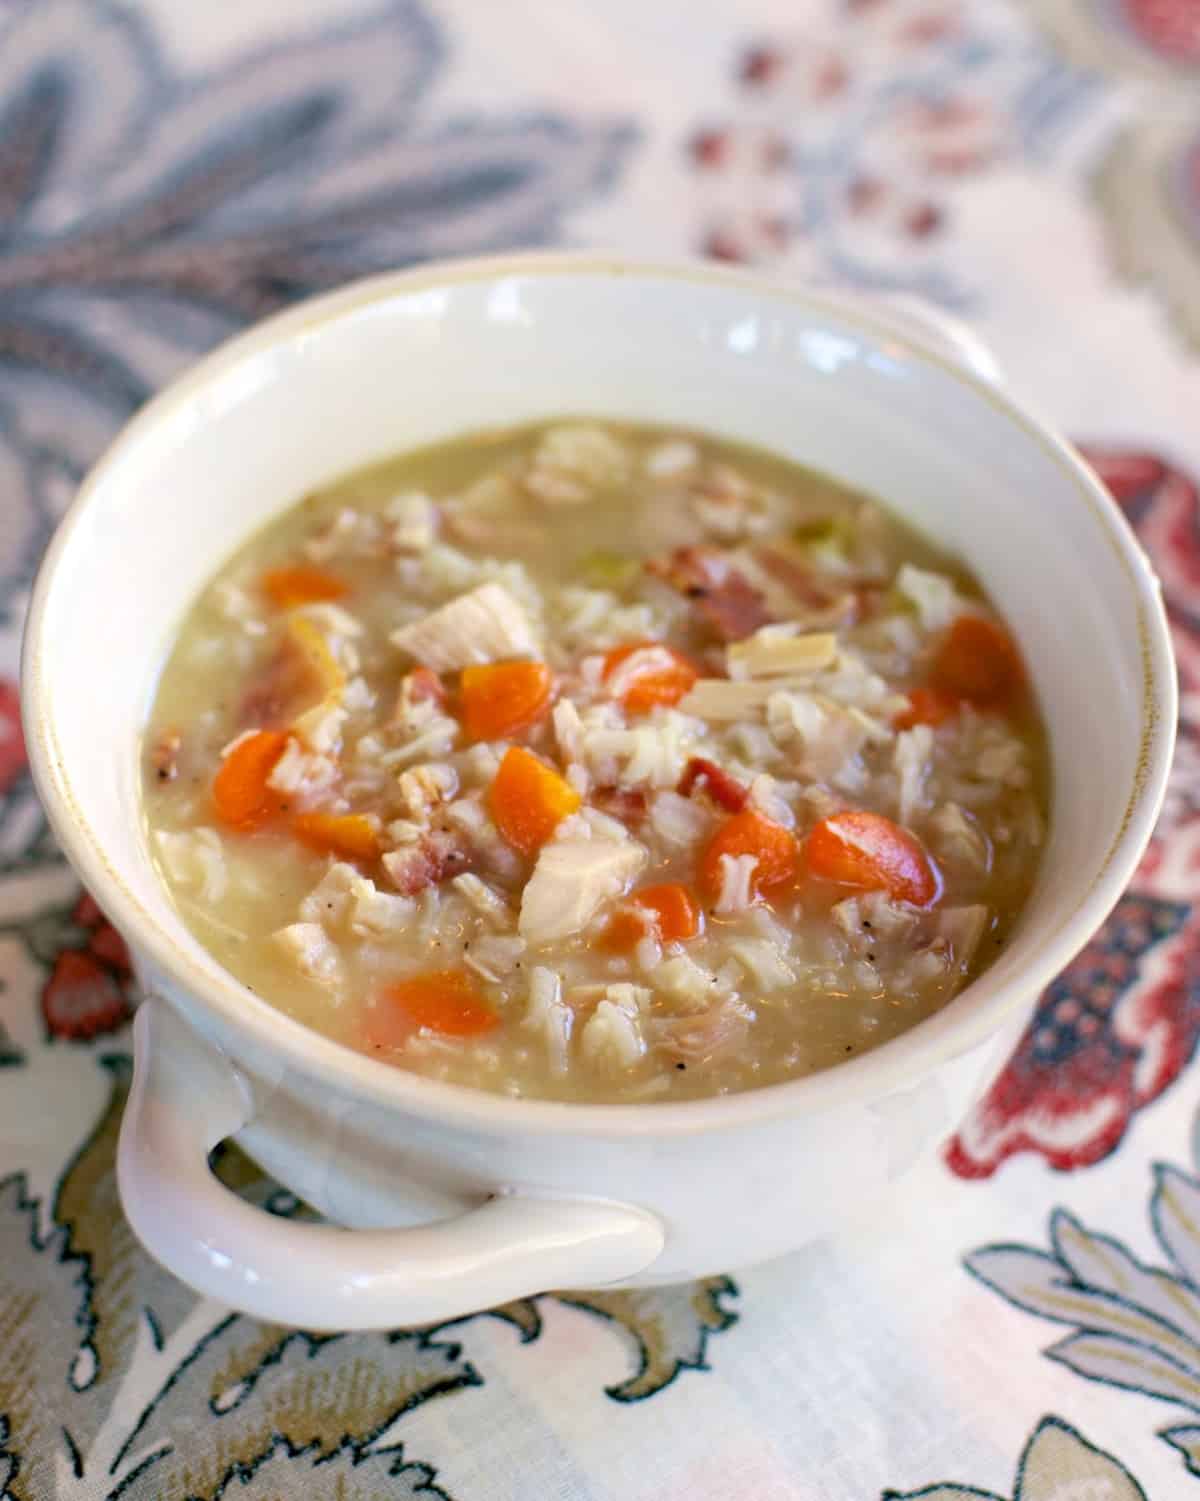 Chicken, Bacon & Rice Soup recipe - chicken broth, water, rice, cream of celery soup, carrots, bacon and chicken - use a rotisserie chicken and this soup is ready in 20 minutes! Just dump everything in the pot, bring to a boil and simmer. So easy and super delicious! Can also use uncooked chicken breast and make in the slow cooker.